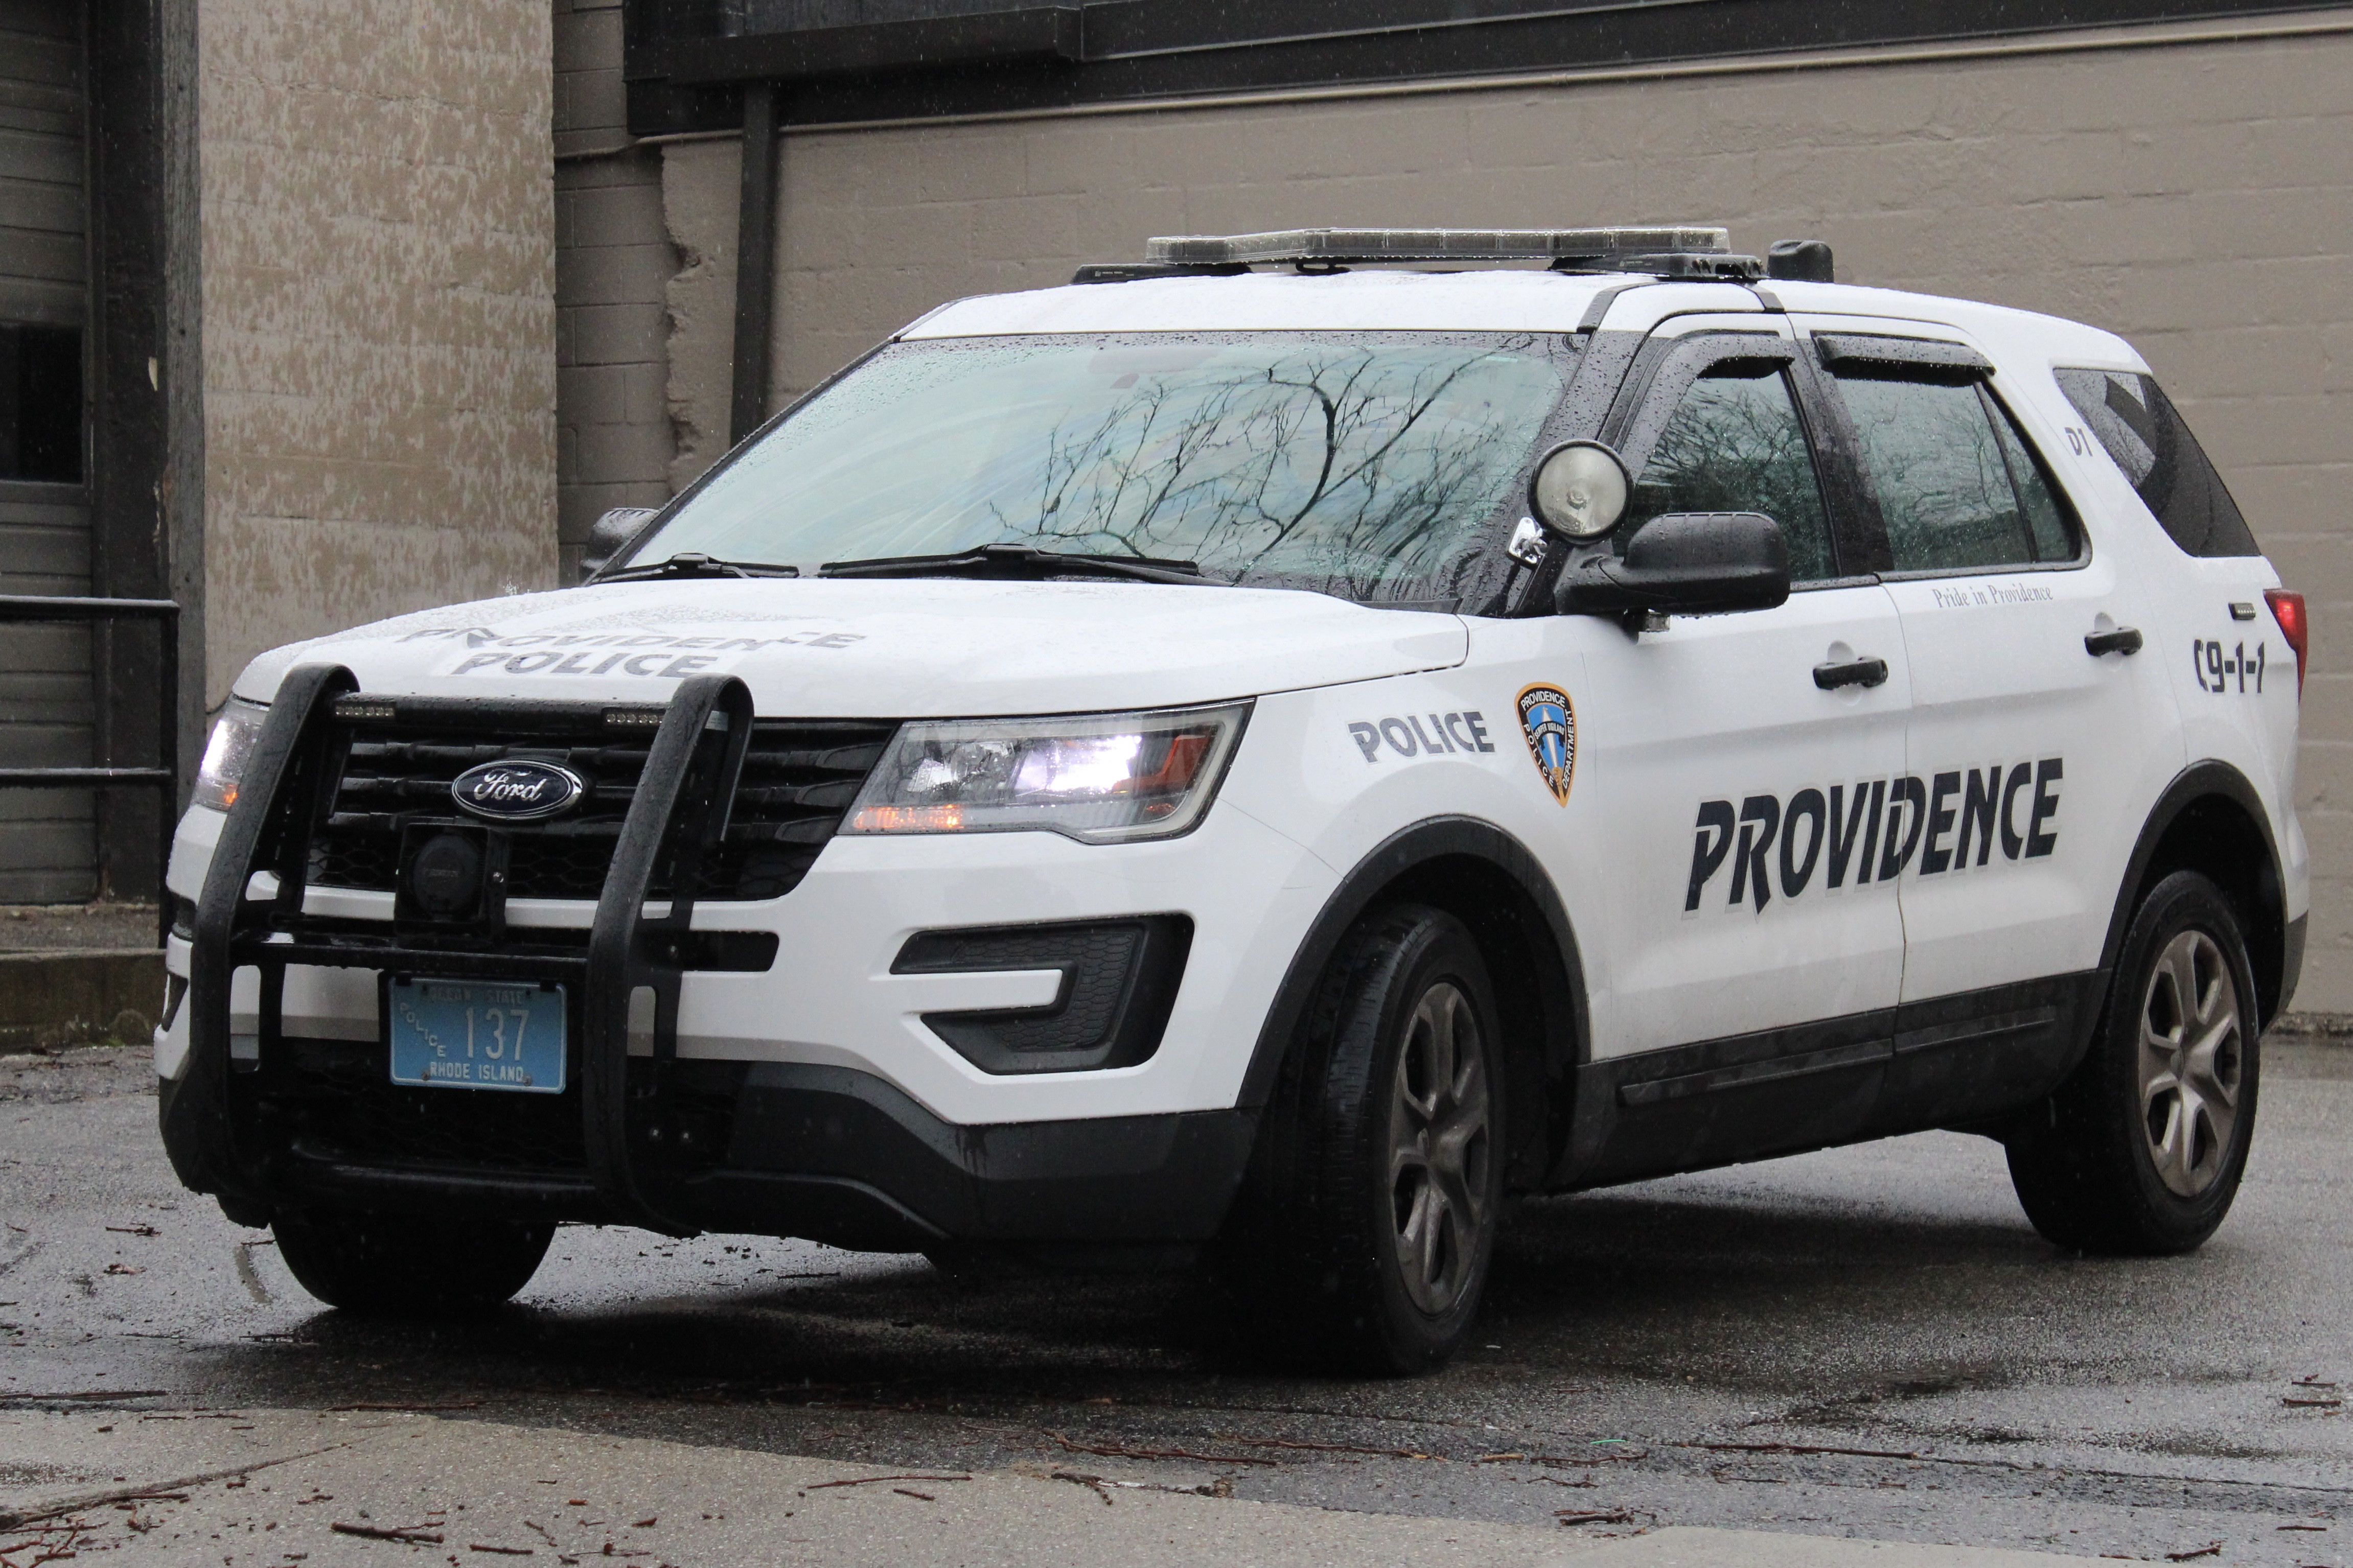 A photo  of Providence Police
            Cruiser 137, a 2017 Ford Police Interceptor Utility             taken by @riemergencyvehicles